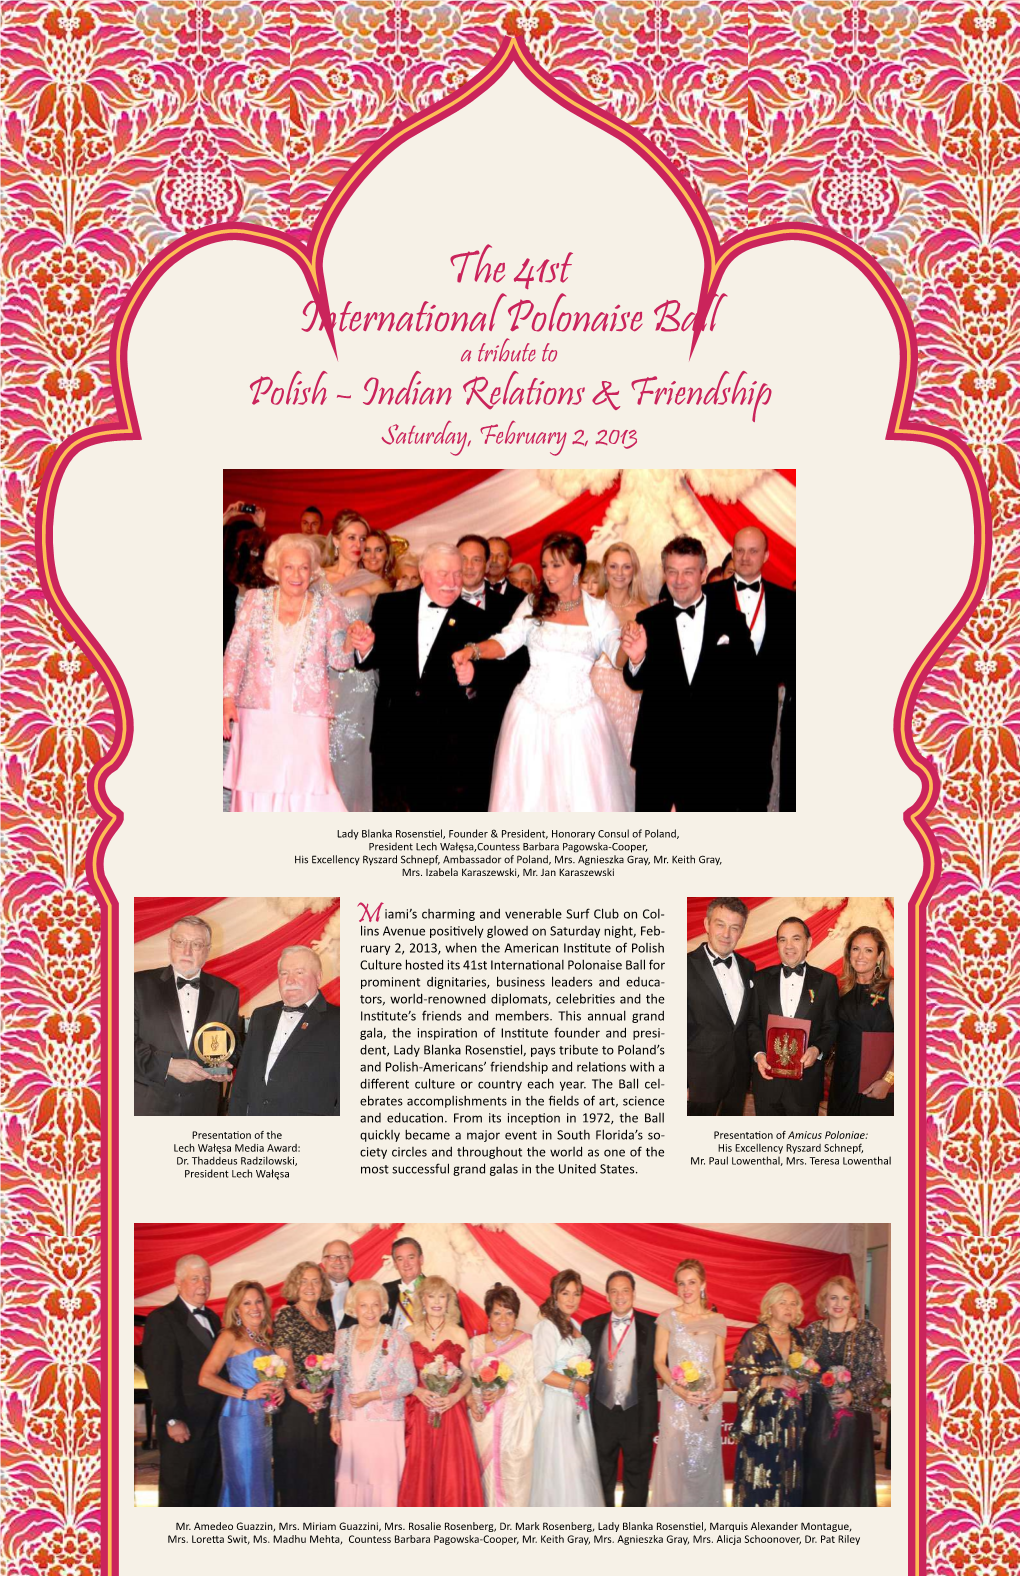 The 41St International Polonaise Ball a Tribute to Polish – Indian Relations & Friendship Saturday, February 2, 2013